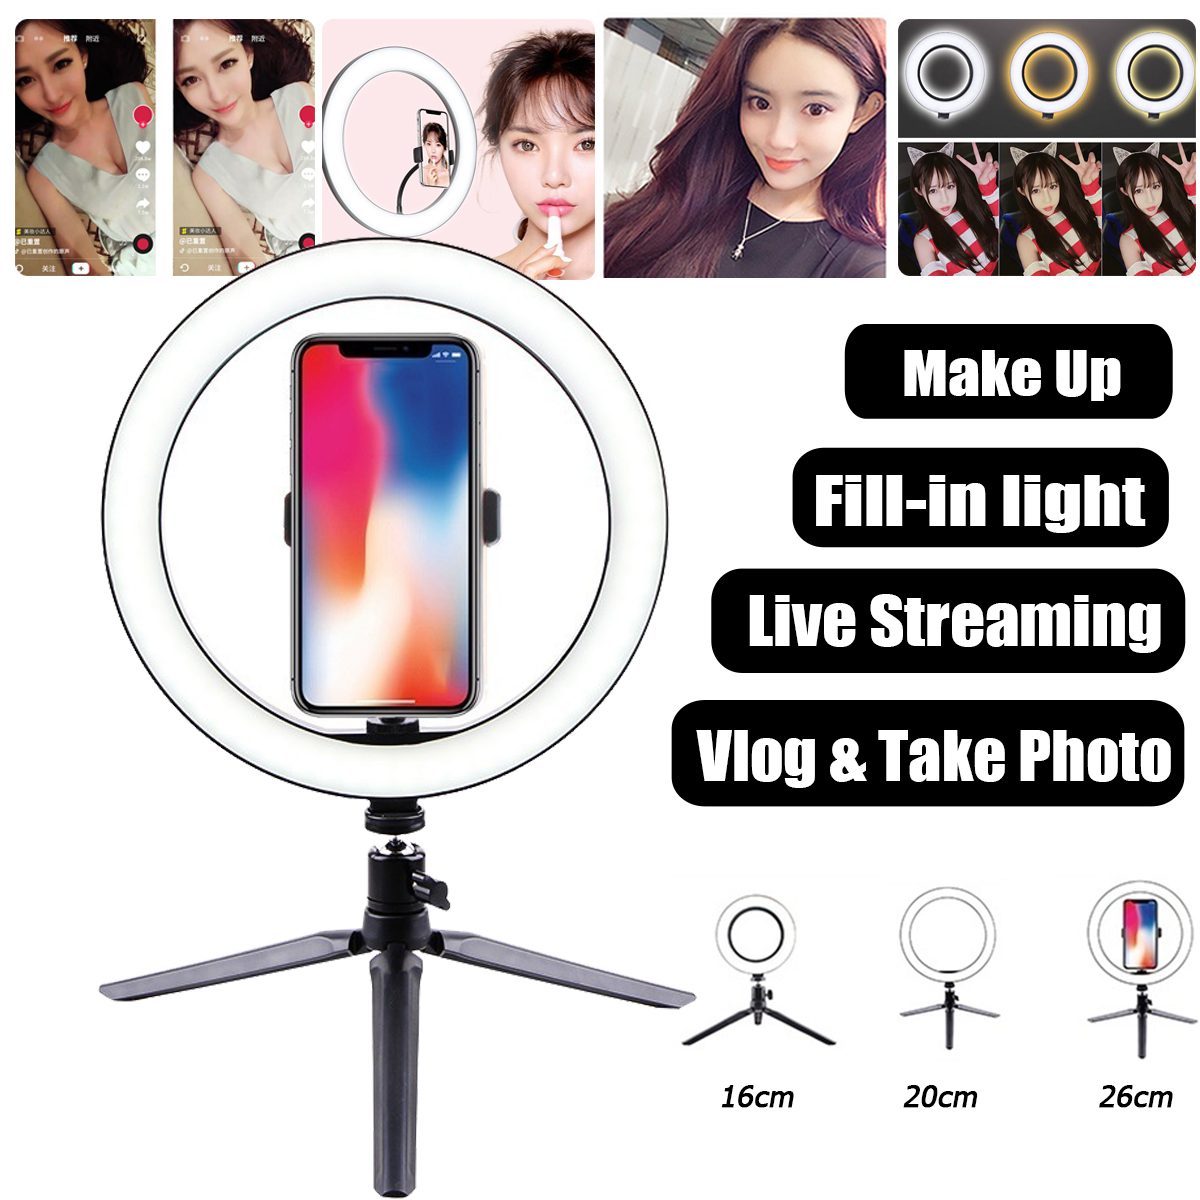 Portable-Ring-Light-LED-Makeup-Ring-Lamp-USB-Selfie-Ring-Lamp-Phone-Holder-Tripod-Stand-Photography--1579954-2